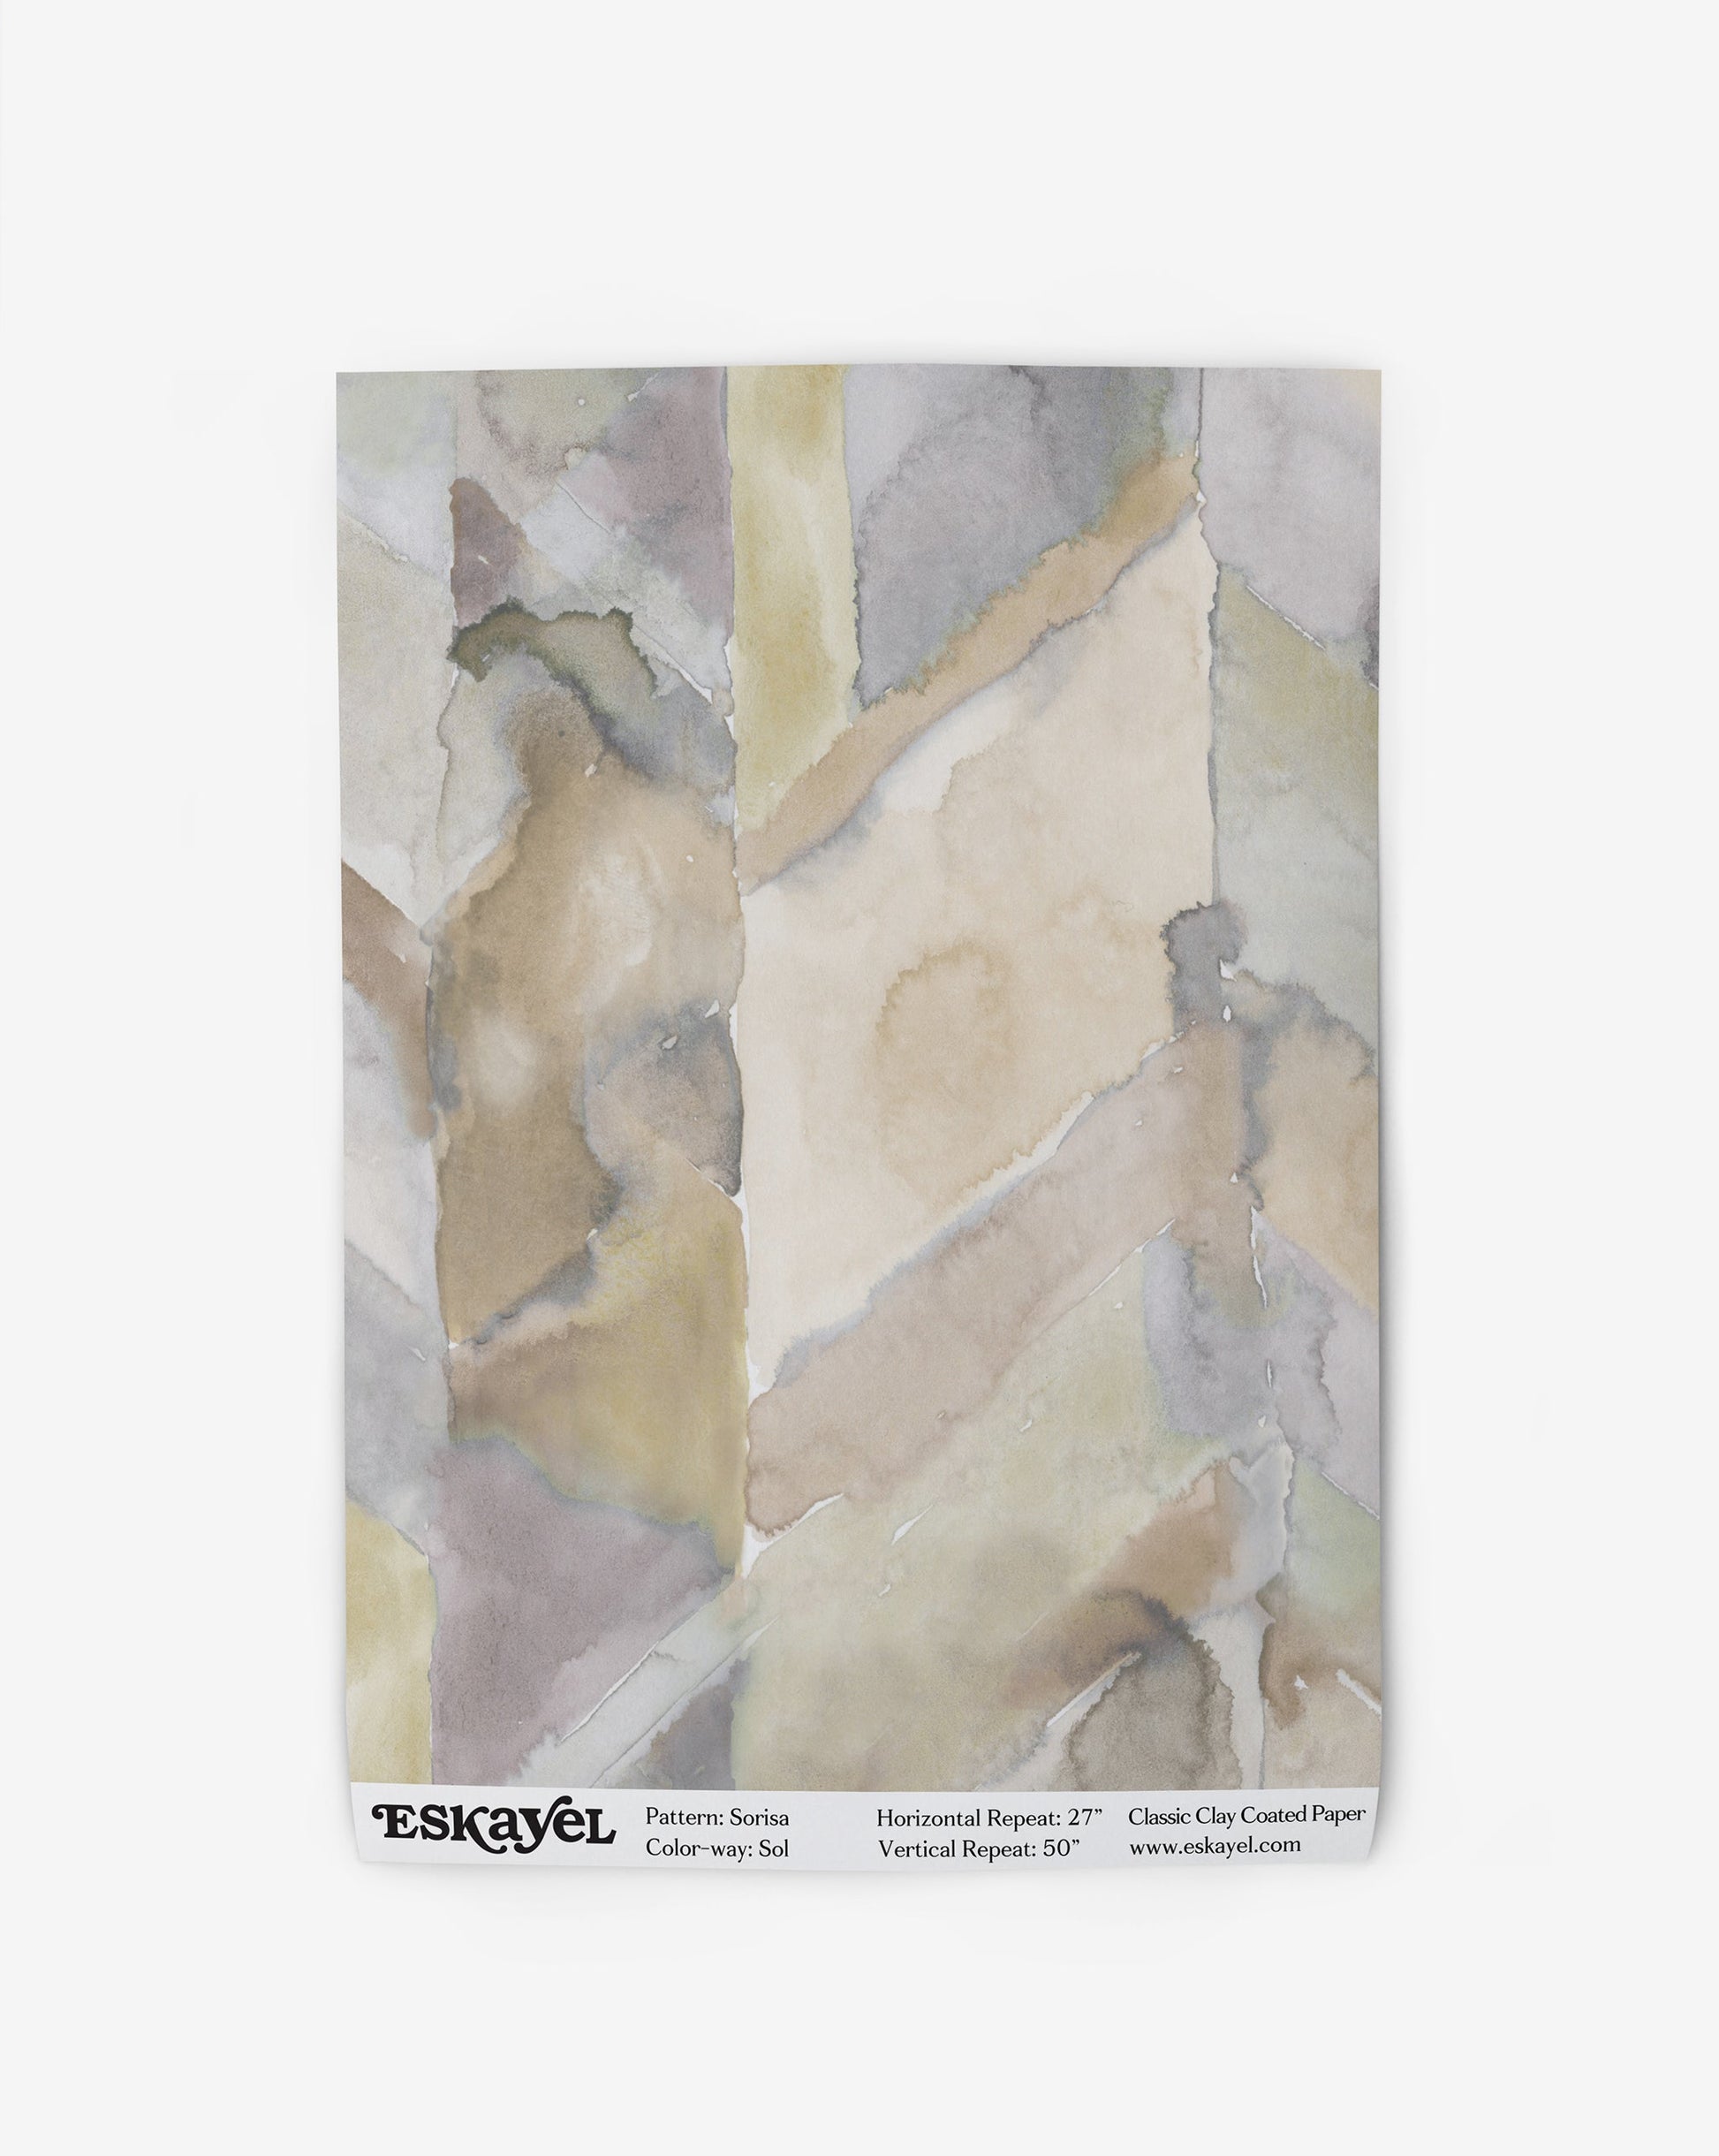 A wallpaper from the Sorisa Wallpaper Sol collection with a watercolor pattern on it